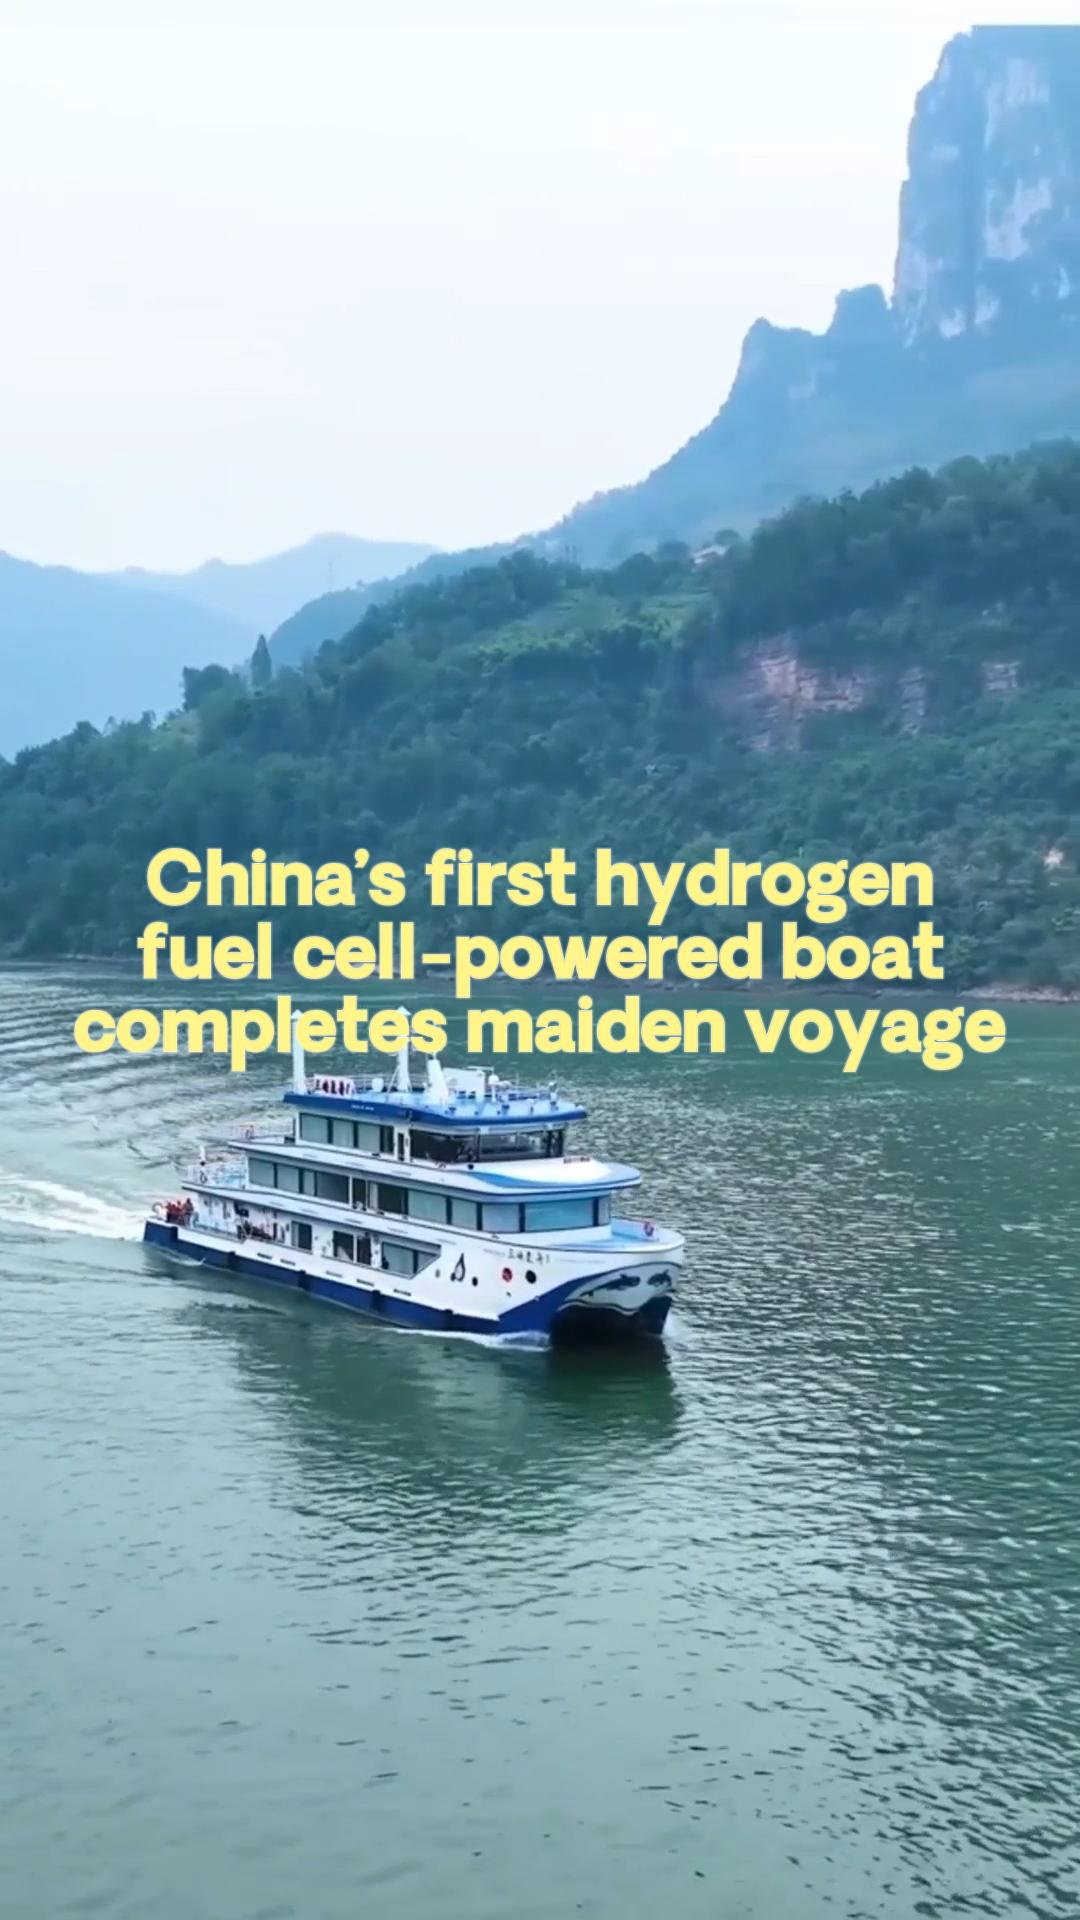 China's first hydrogen fuel cell-powered boat completes maiden voyage